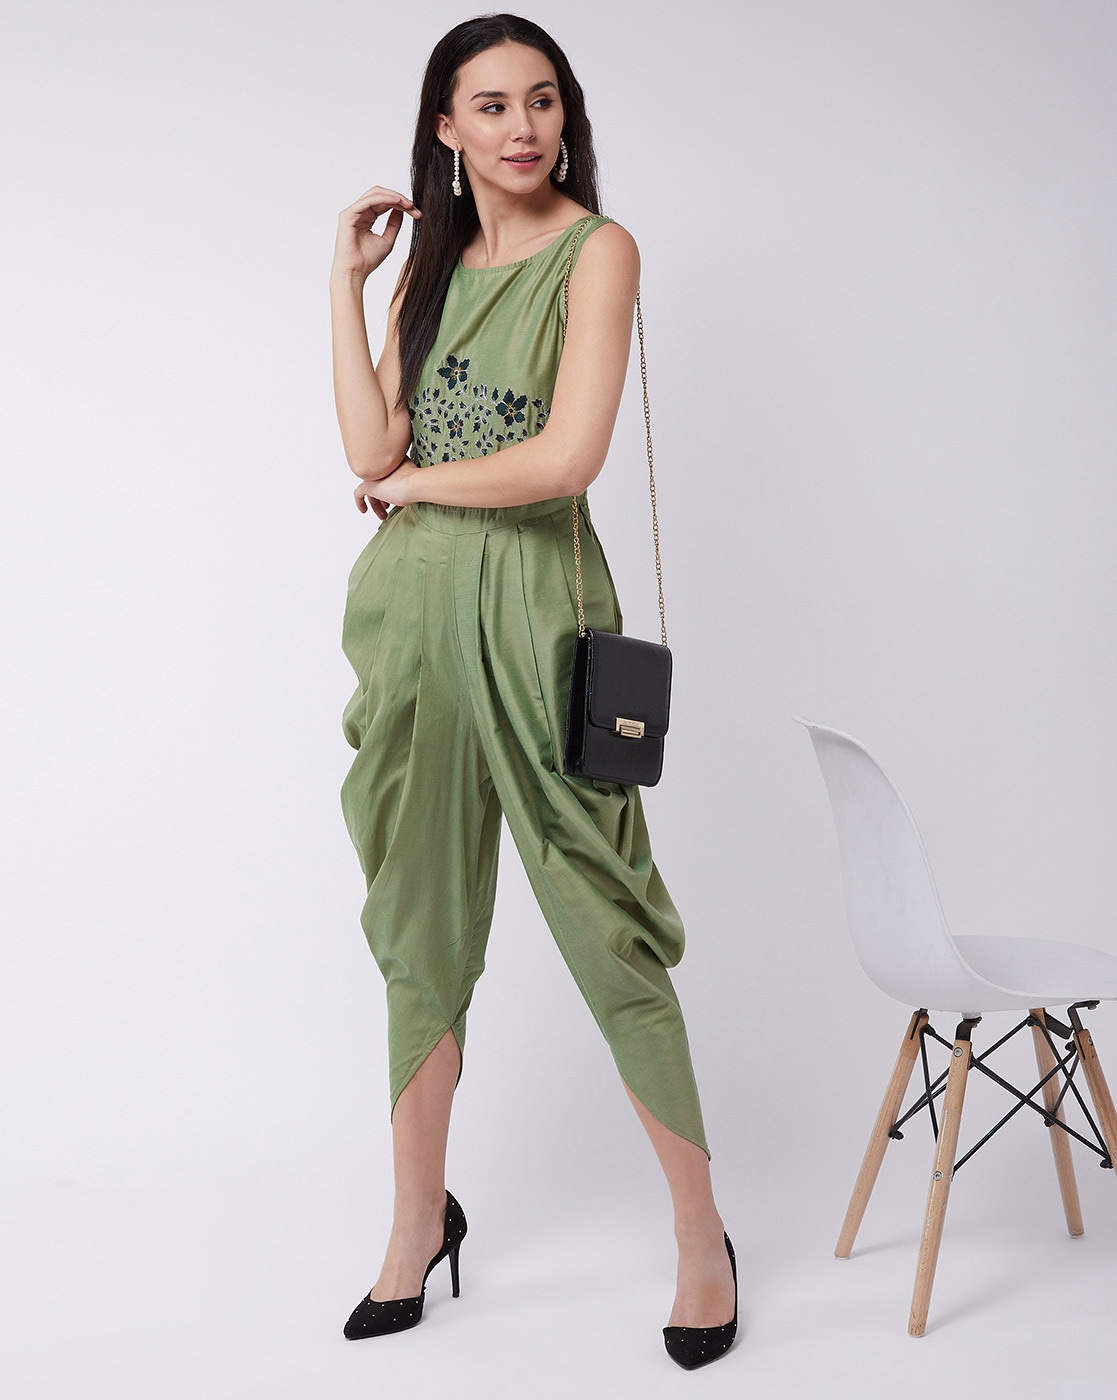 THEY SAY - COBALT BLUE ONE-SHOULDER DHOTI JUMPSUIT – Papa Don't Preach